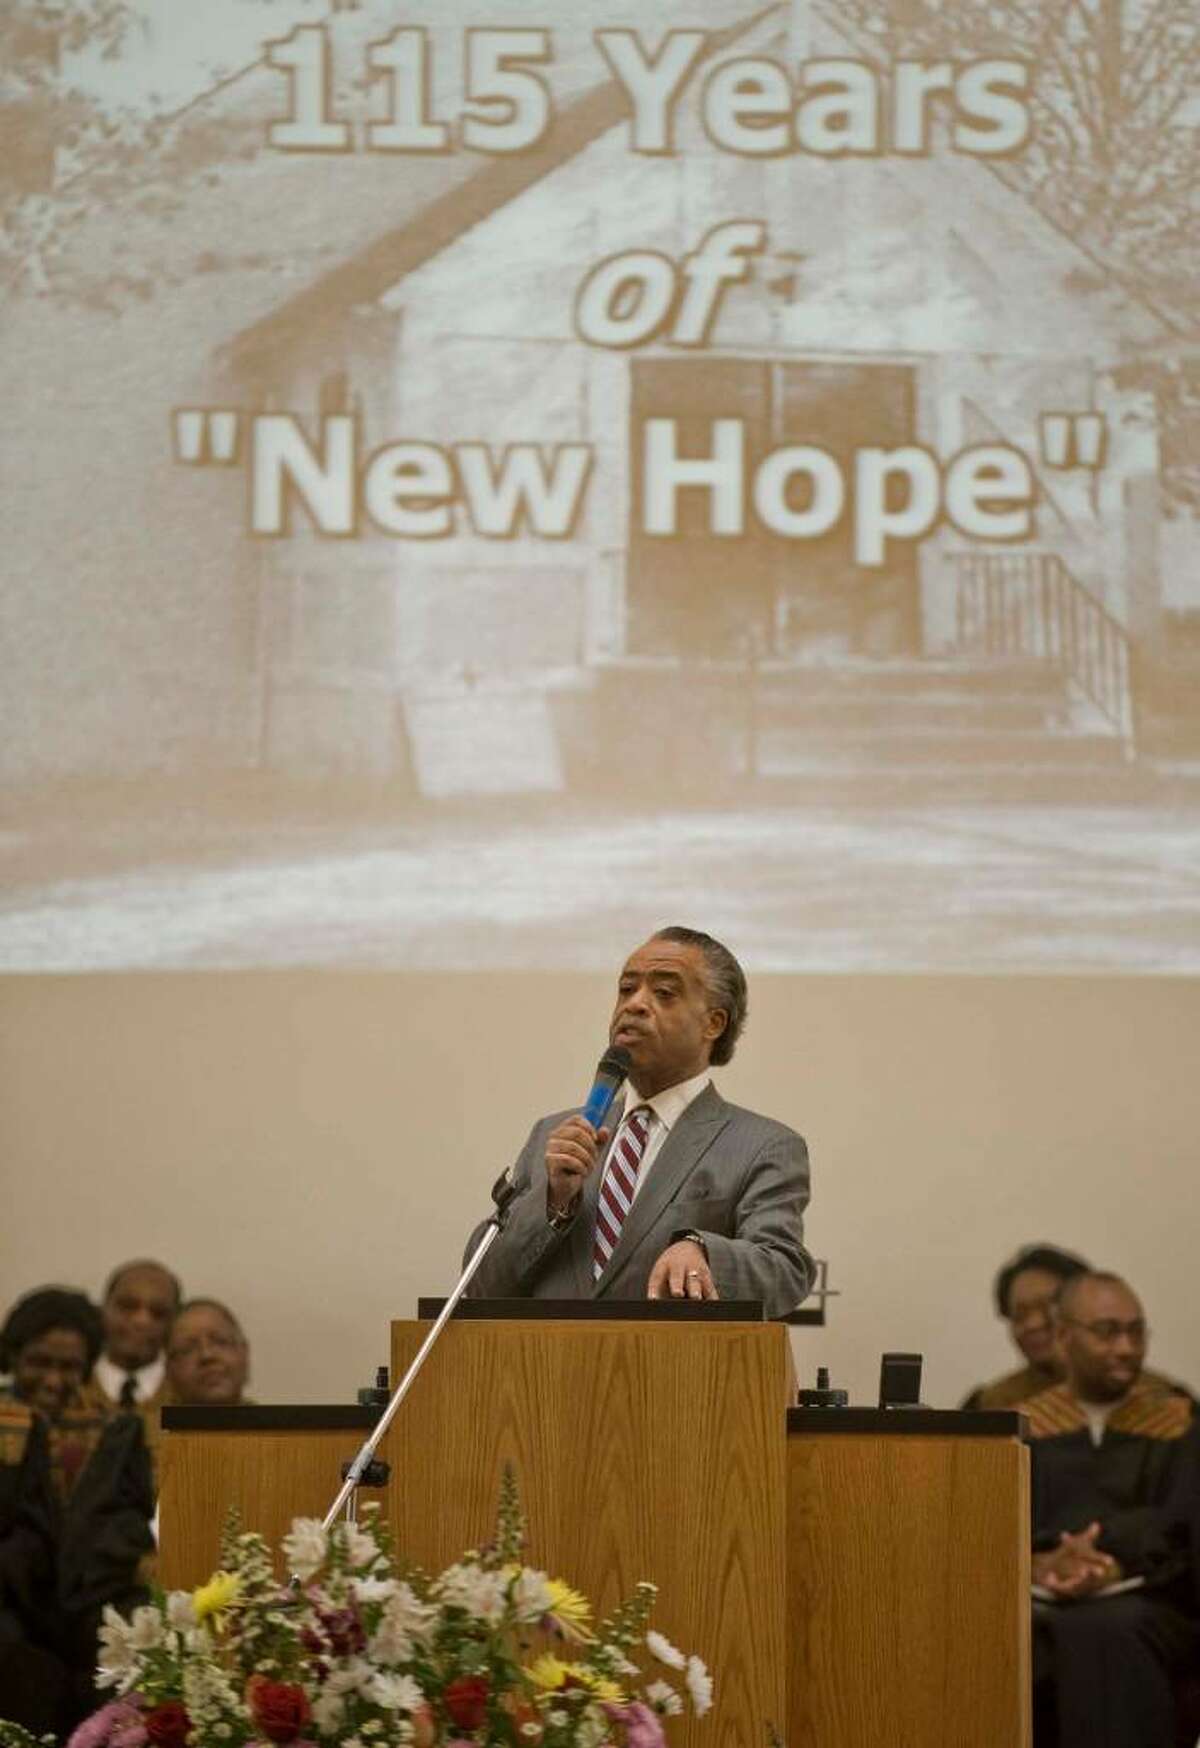 Al Sharpton talks to the congregation as the featured speaker at the New Hope Baptist Church’s 115th anniversary service. Sunday, May 2, 2010